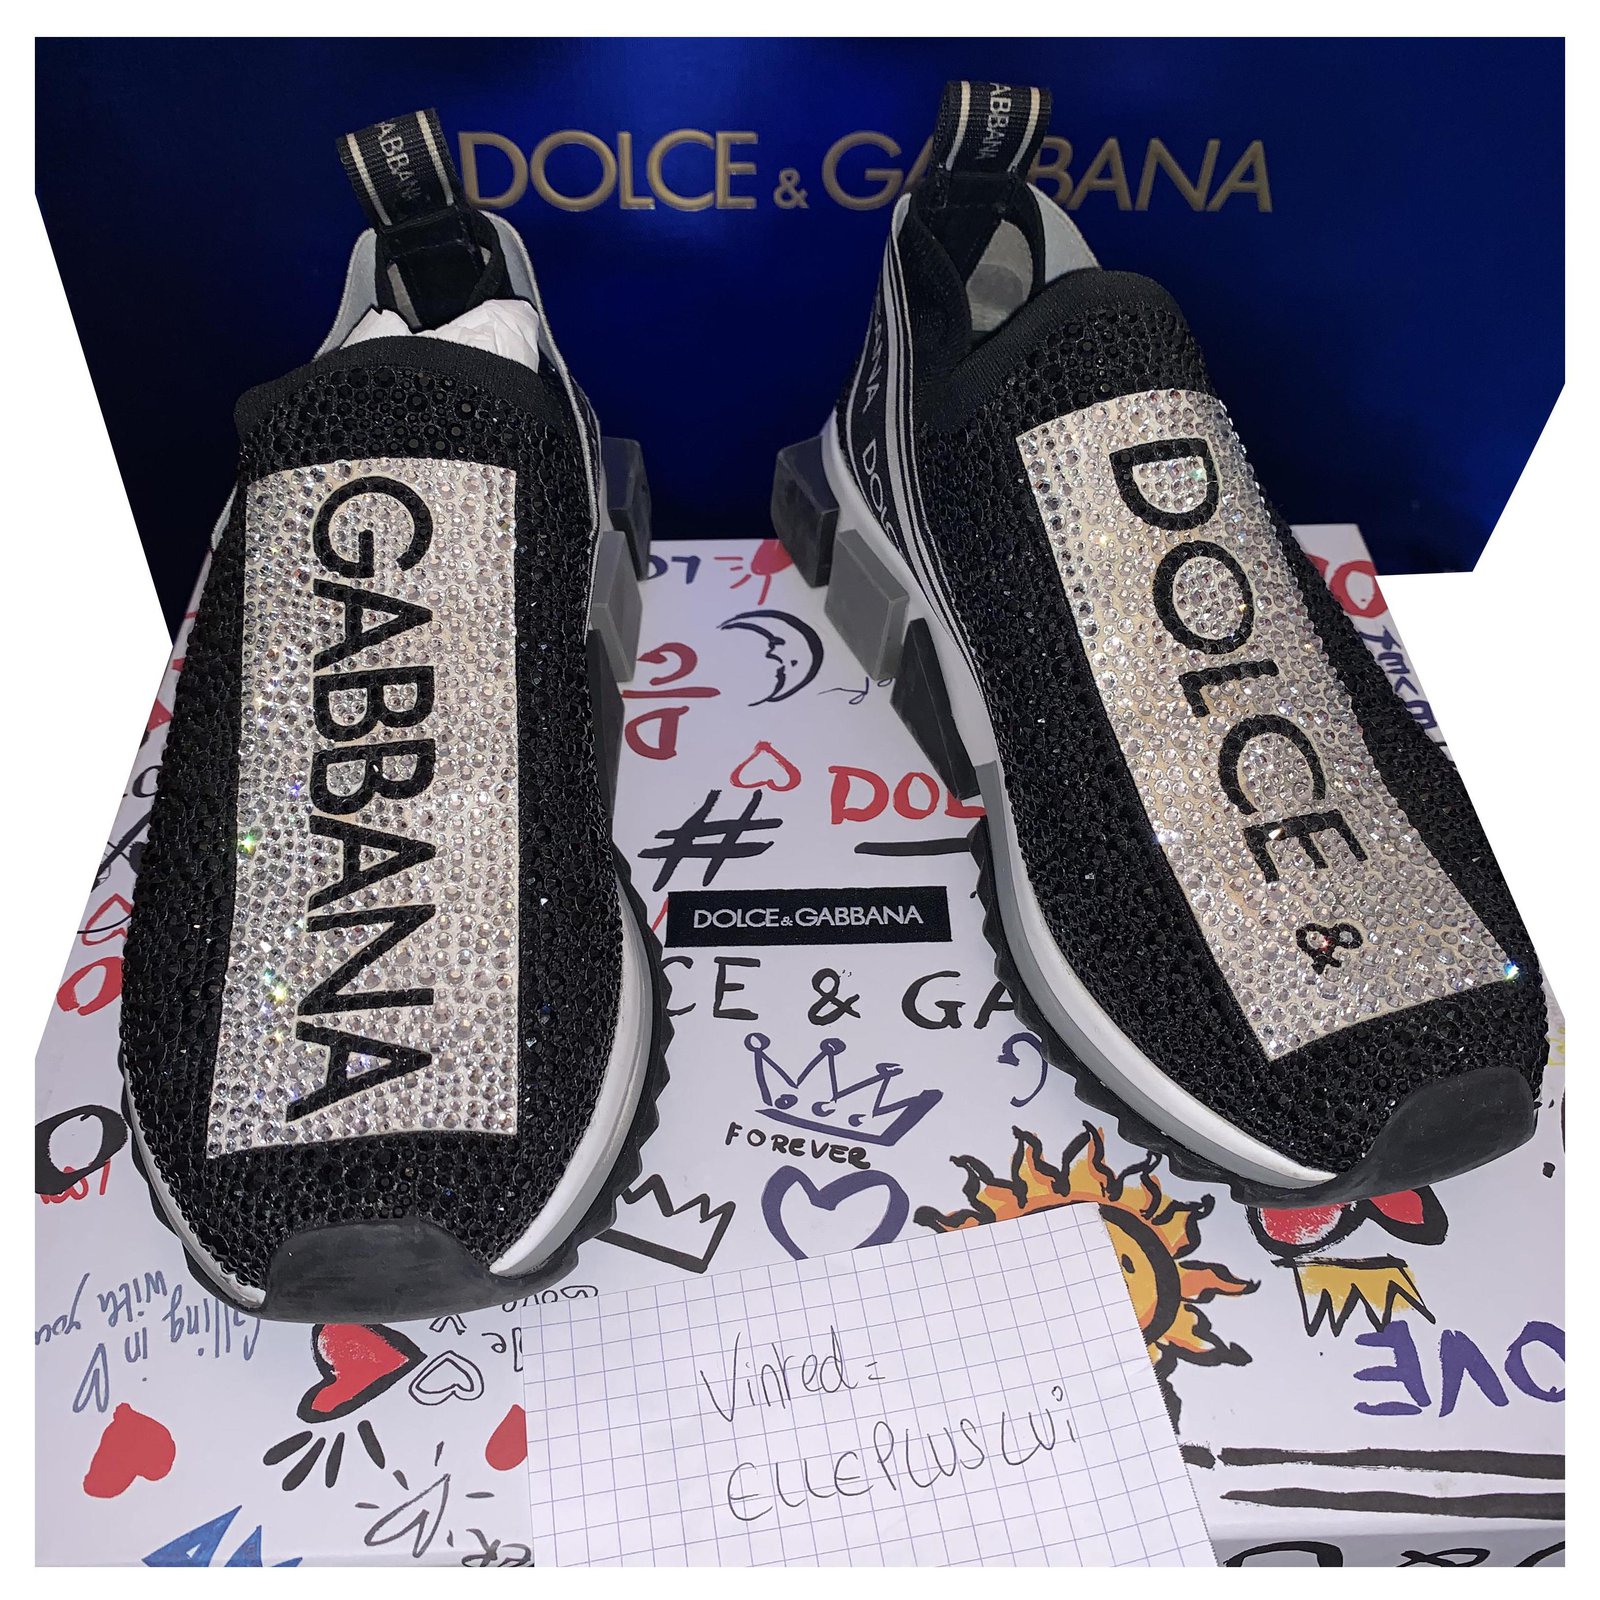 dolce and gabbana shoes shiny